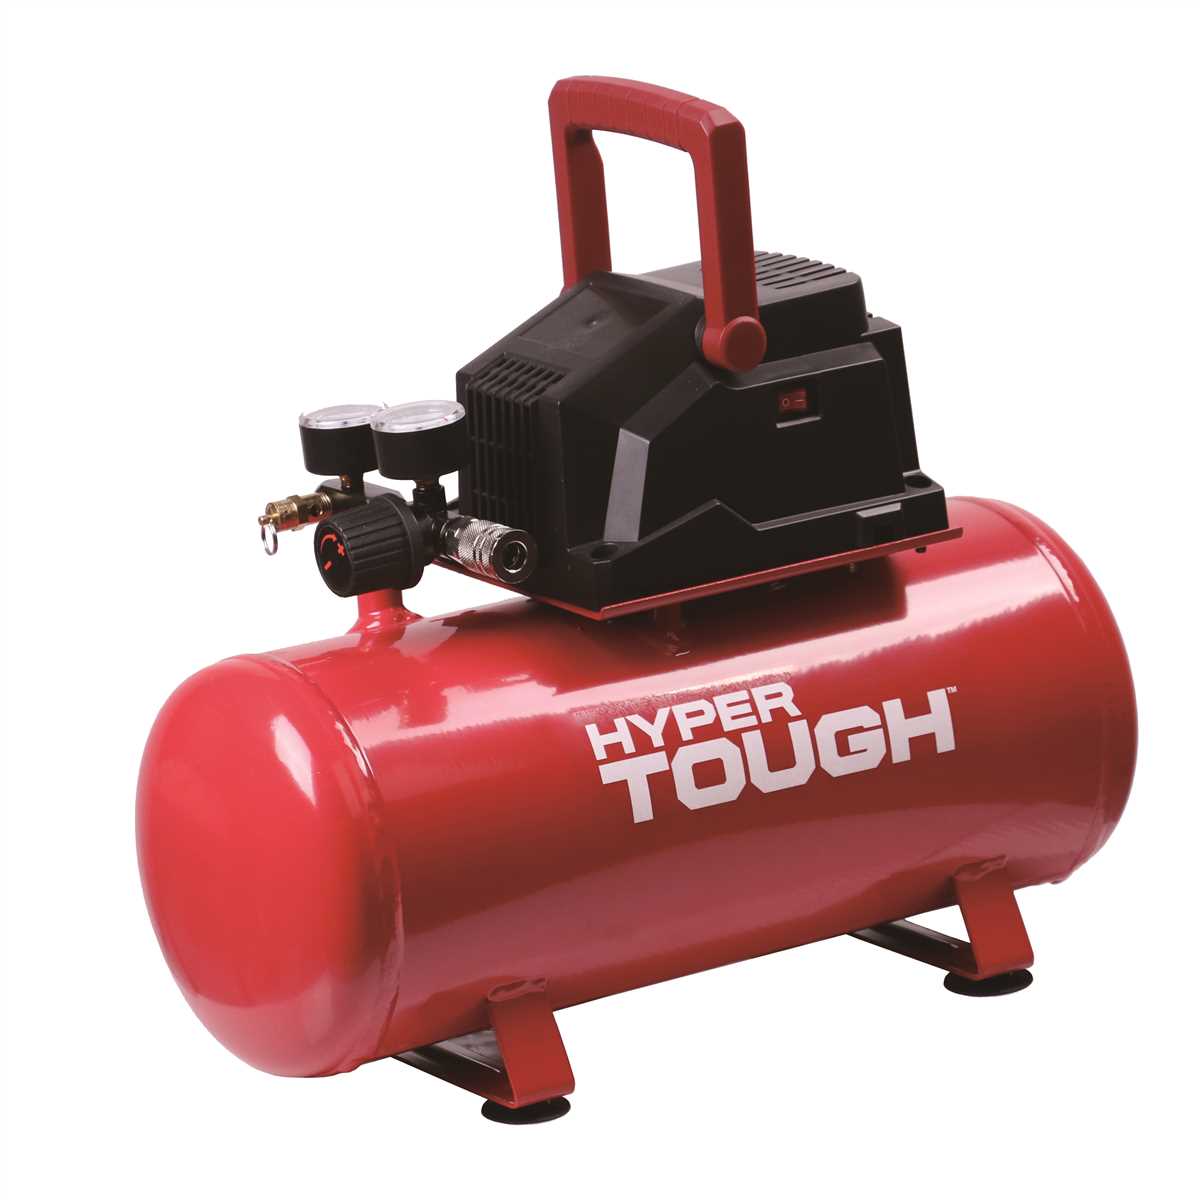 What are the Applications of a Portable Air Compressor?